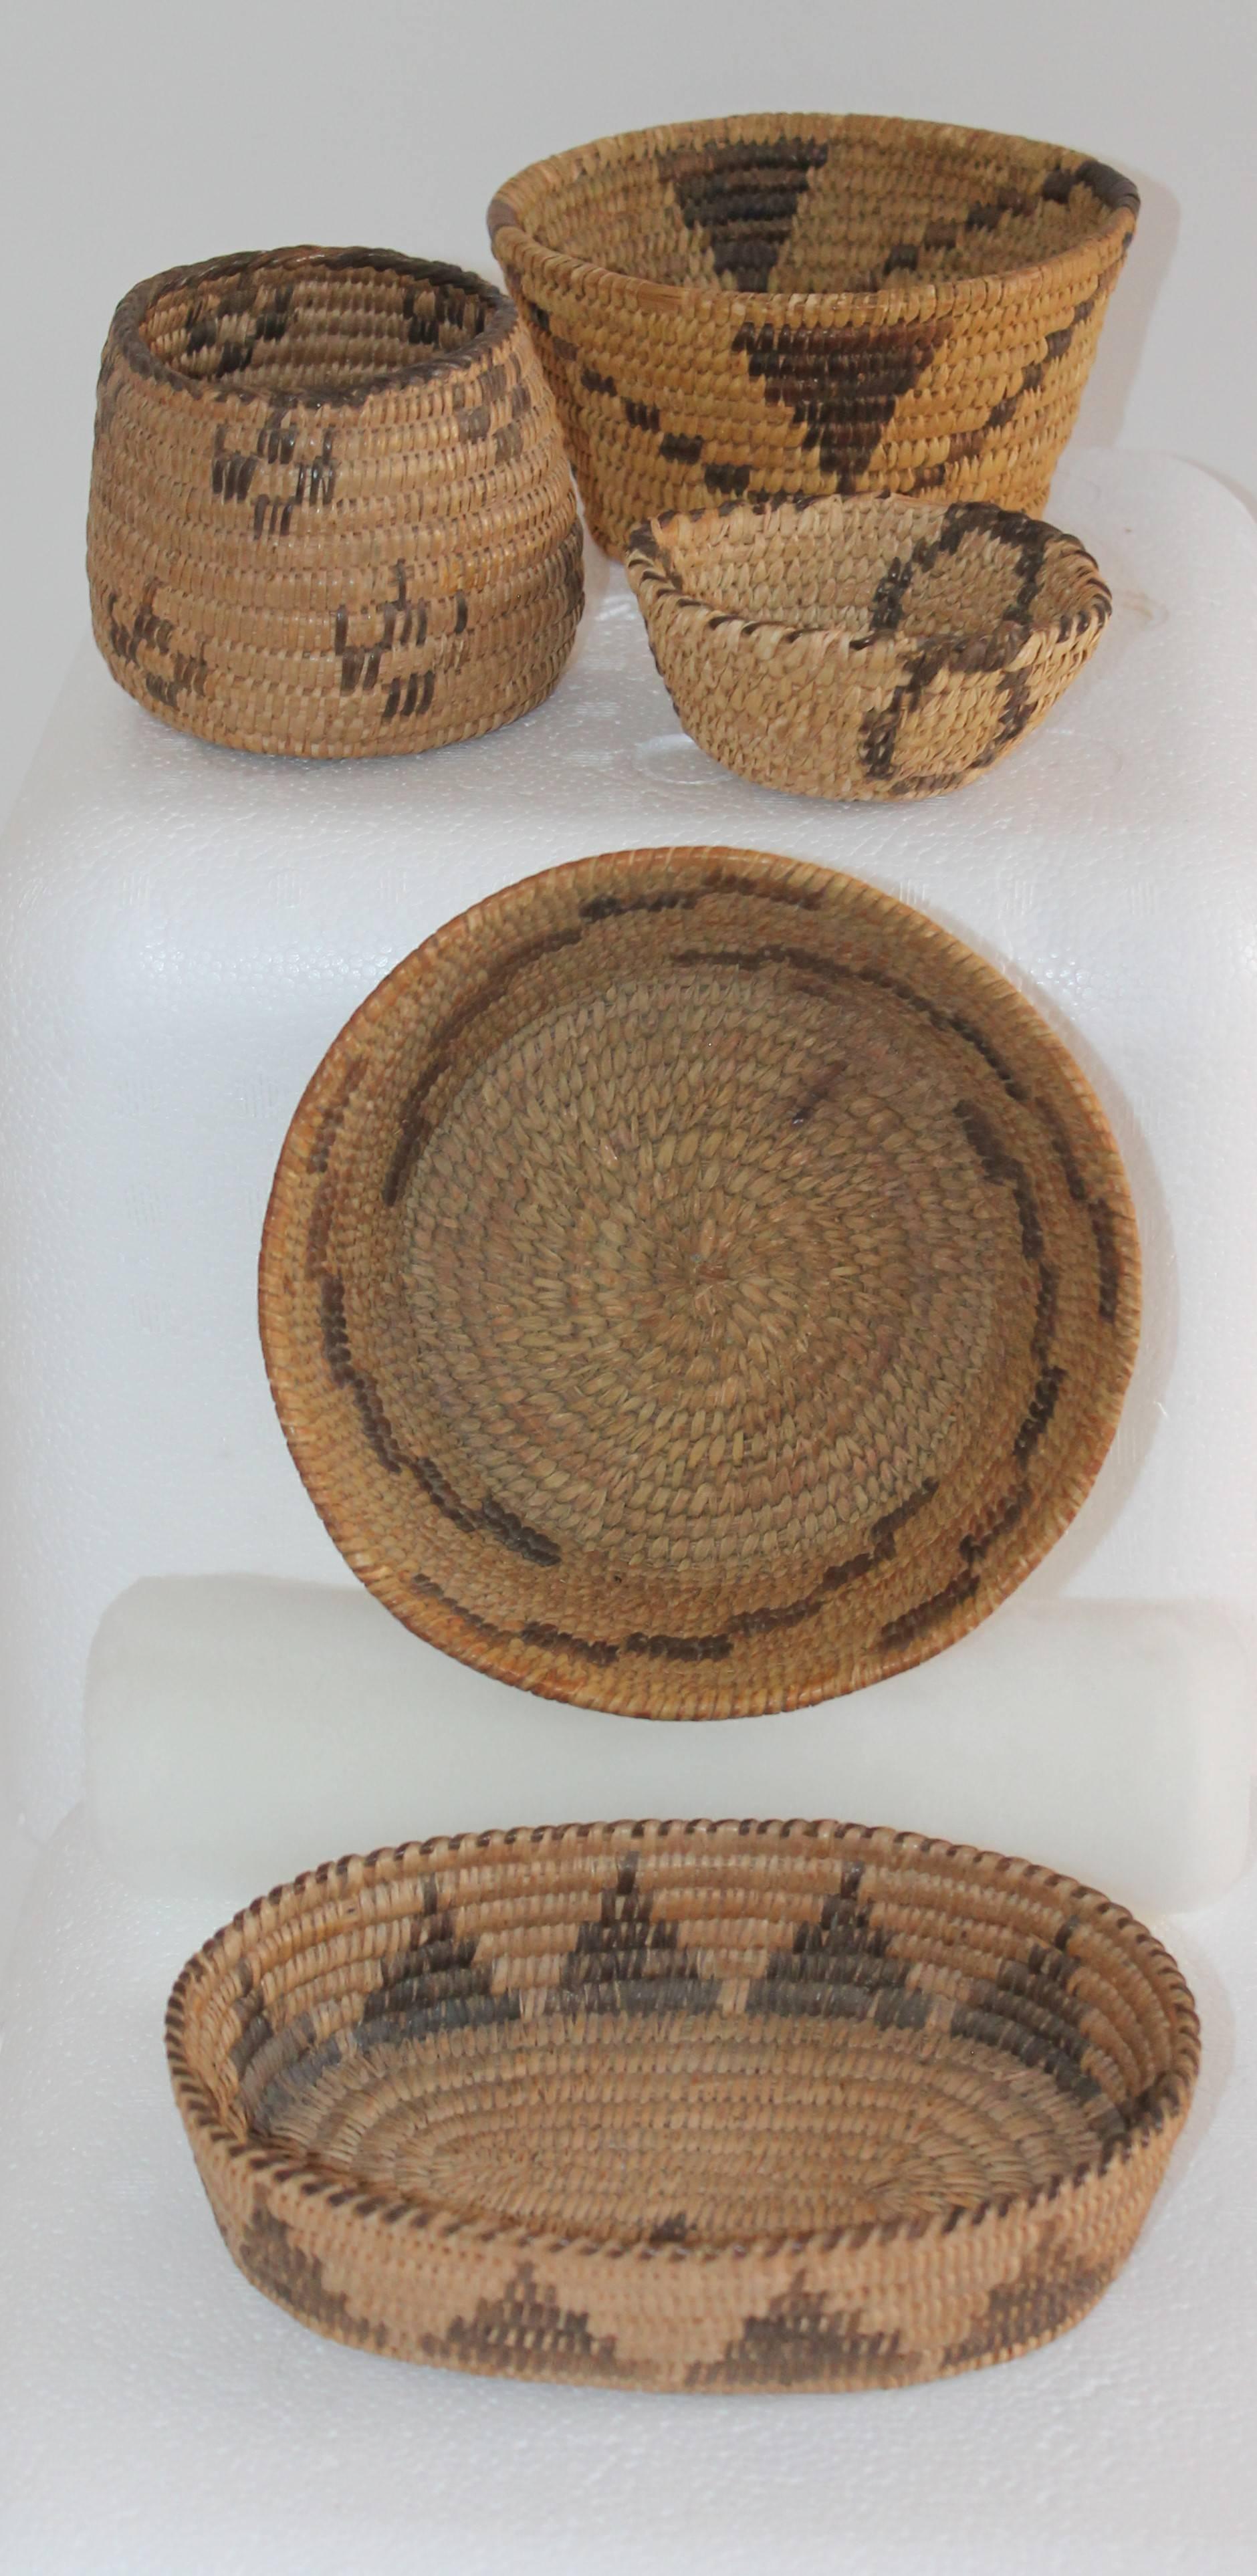 This fine collection of five amazing miniature Indian baskets are in great condition and quite hard to find. Various sizes from 4-6 inches in width.